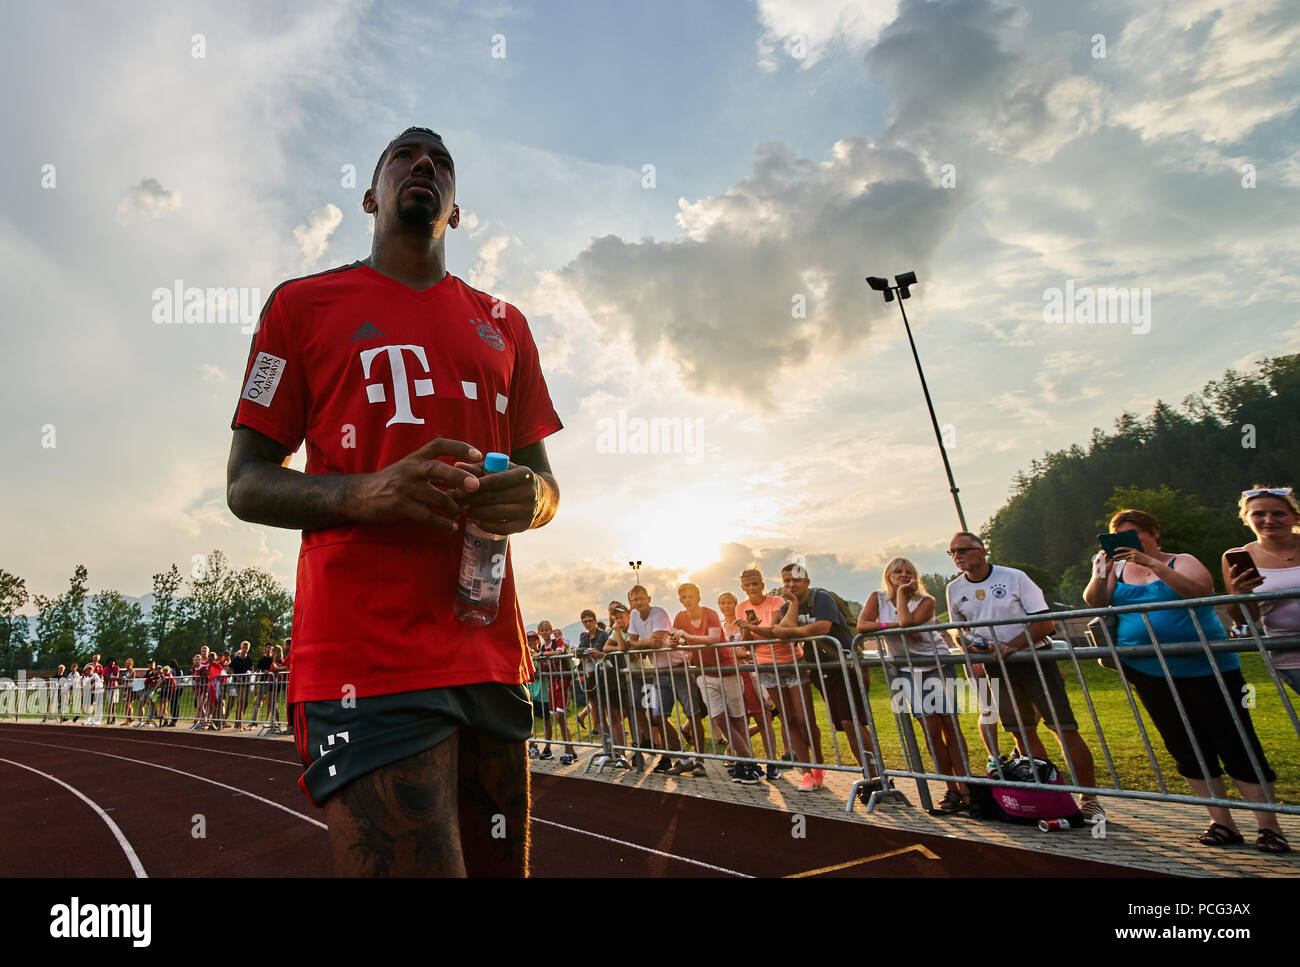 Rottach-Egern, Tegernsee, Germany. 2nd Aug 2018. FC Bayern Munich, Rottach-Egern, August 02, 2018 Jerome BOATENG (FCB 17)   gives autographs to fans,  half-size, portrait,  in the trainings camp for preparation Season 2018/2019,  August 2, 2018  in Rottach-Egern, Tegernsee, Germany. © Peter Schatz / Alamy Live News Stock Photo